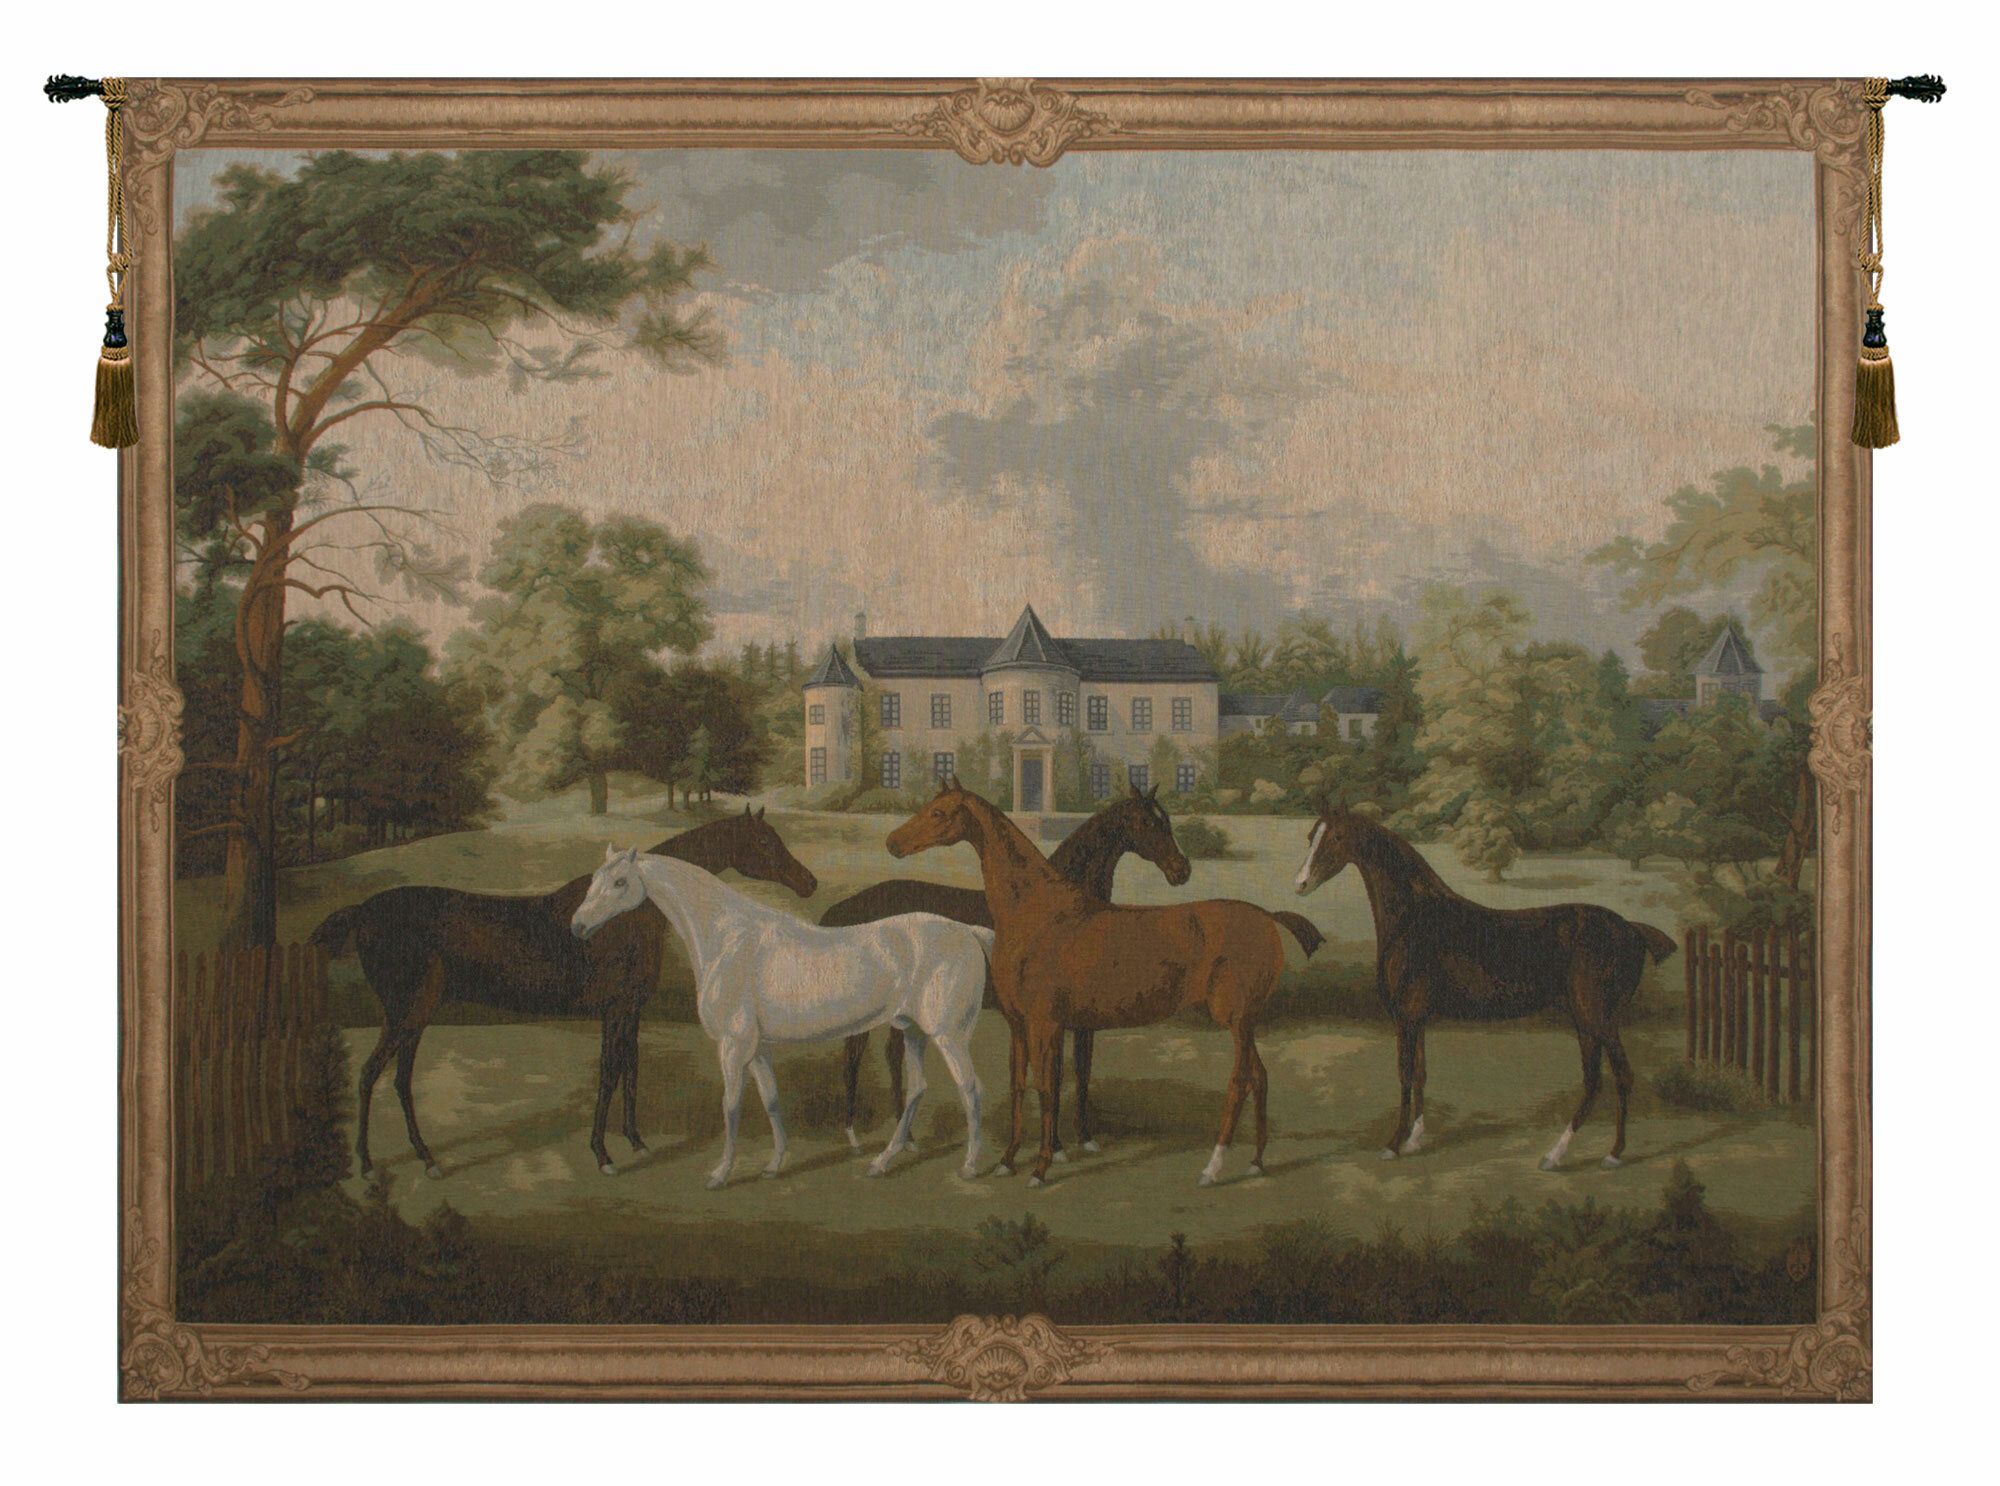 European Five English Horses Tapestry Within Most Current Blended Fabric European Five English Horses Tapestries (View 1 of 20)